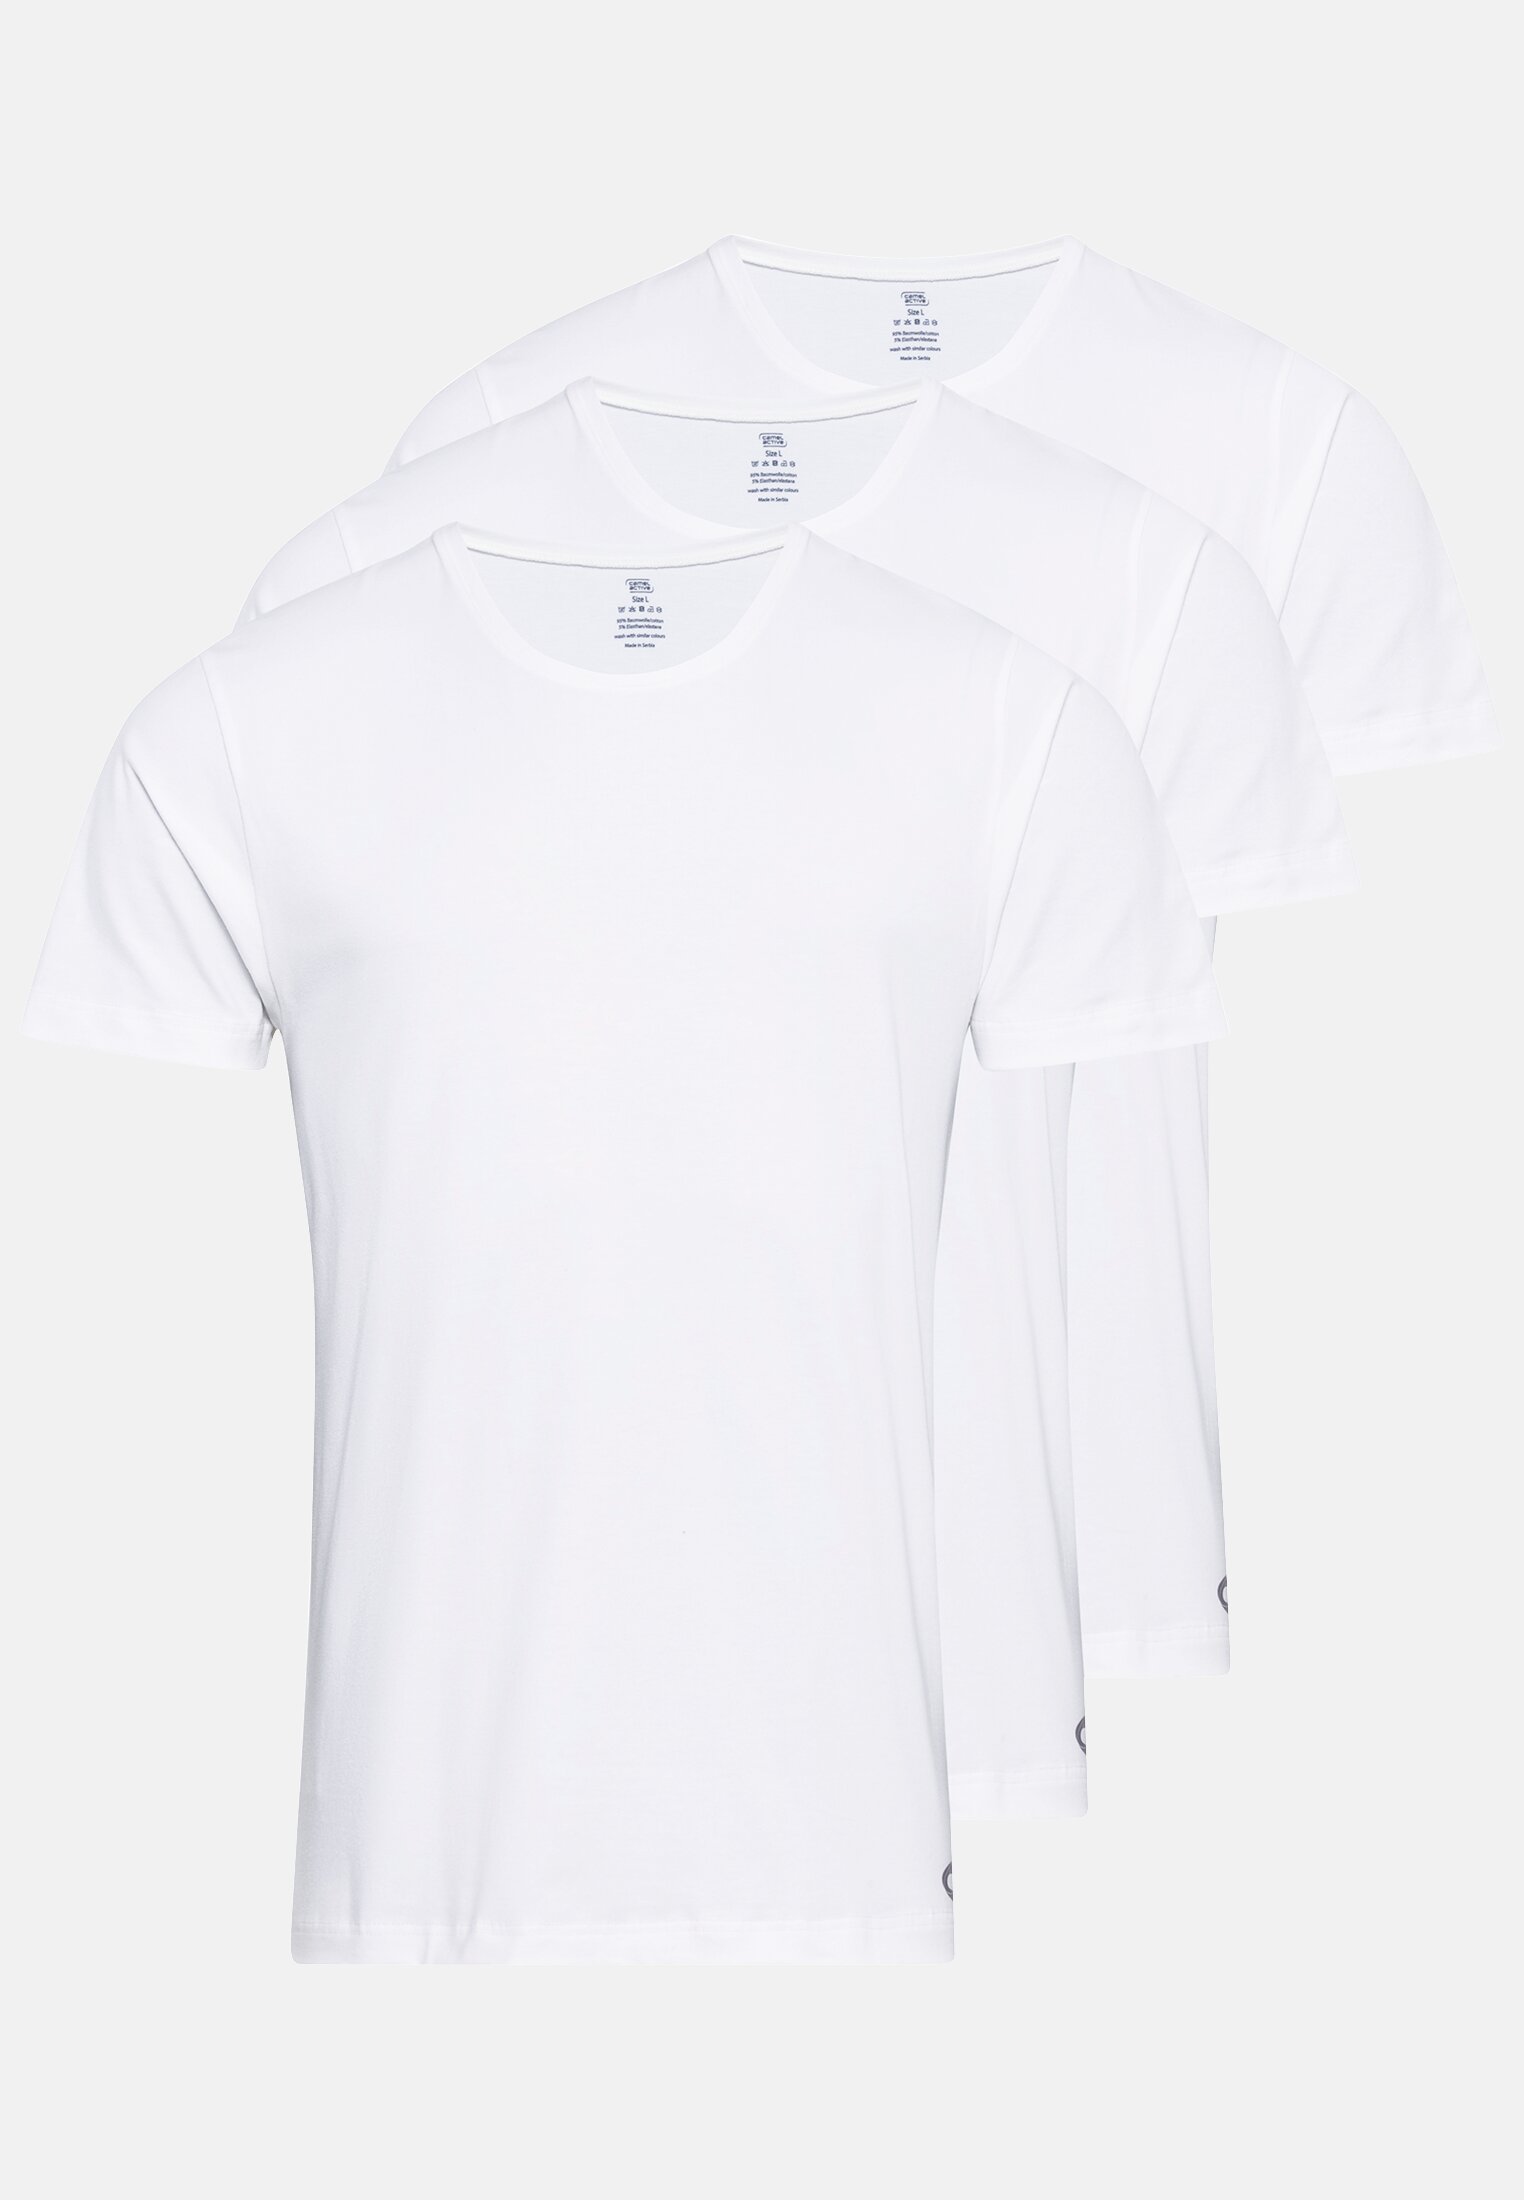 Camel Active Undershirt in a set of 3